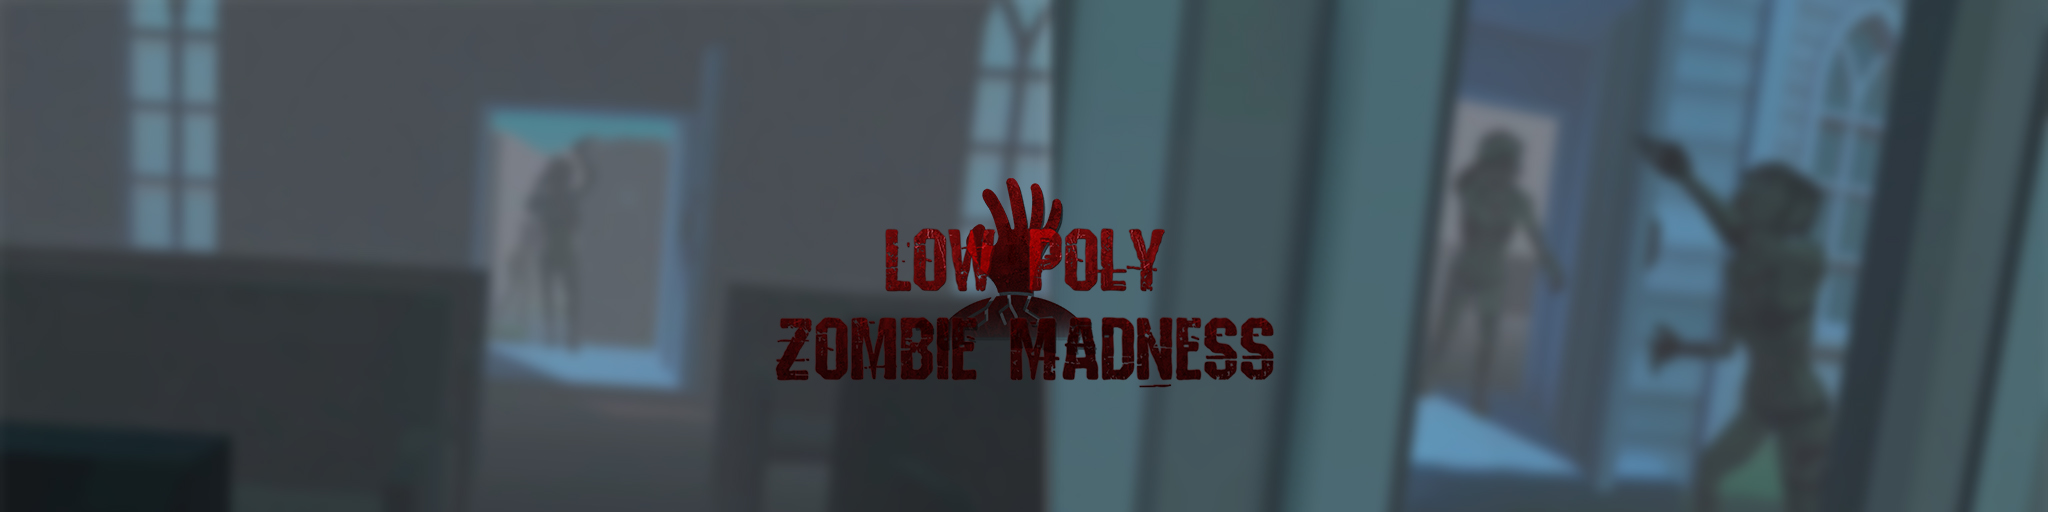 Low Poly Zombie Madness | VR Game